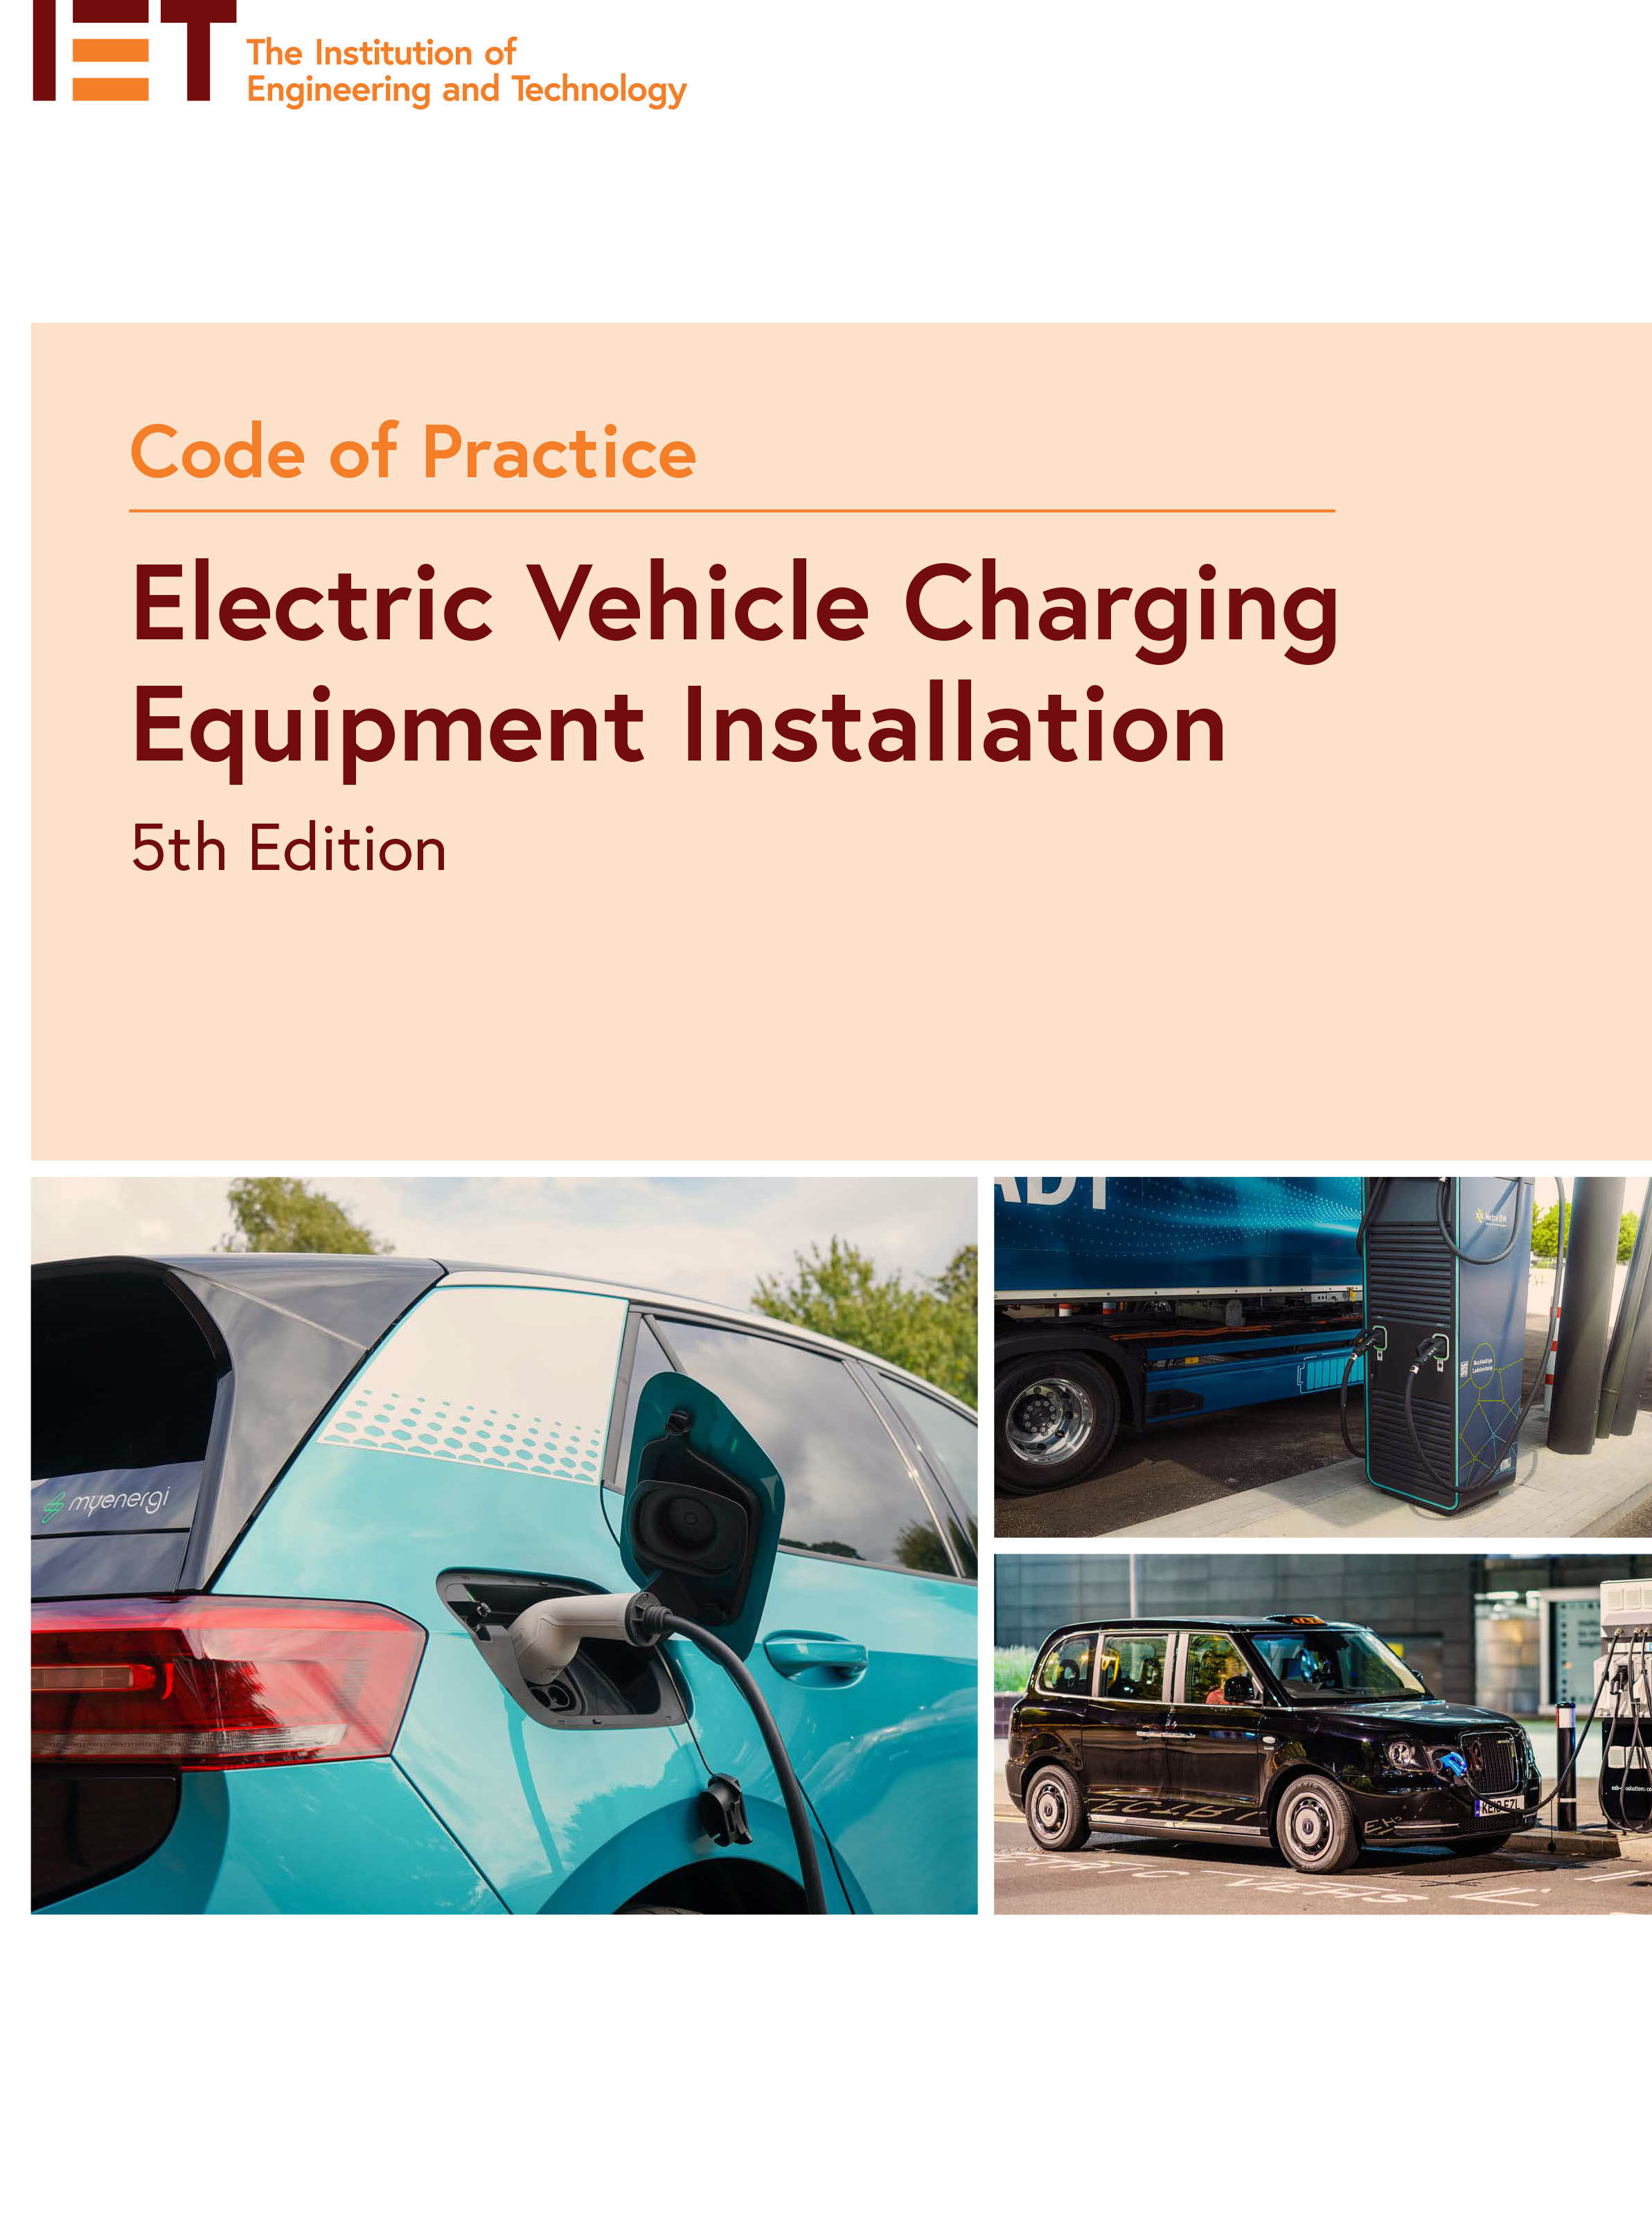 Draft for Public Comment - Code of Practice for Electric Vehicle Charging Equipment Installation, 5th Edition